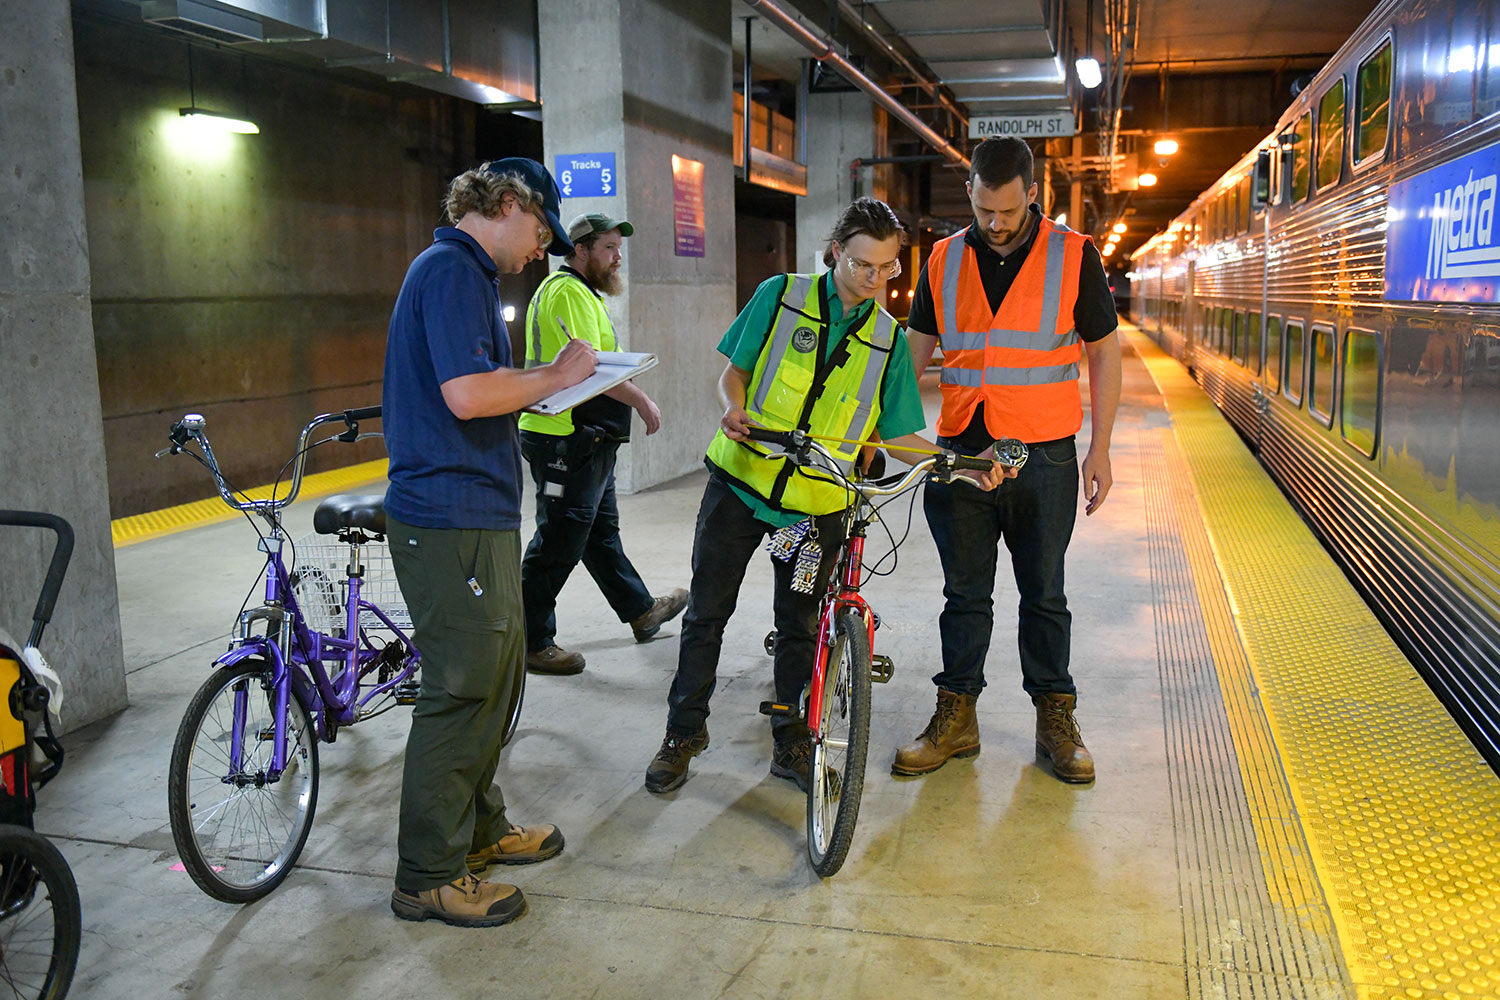 Metra staff measuring different bicycle types at Millennium Station.